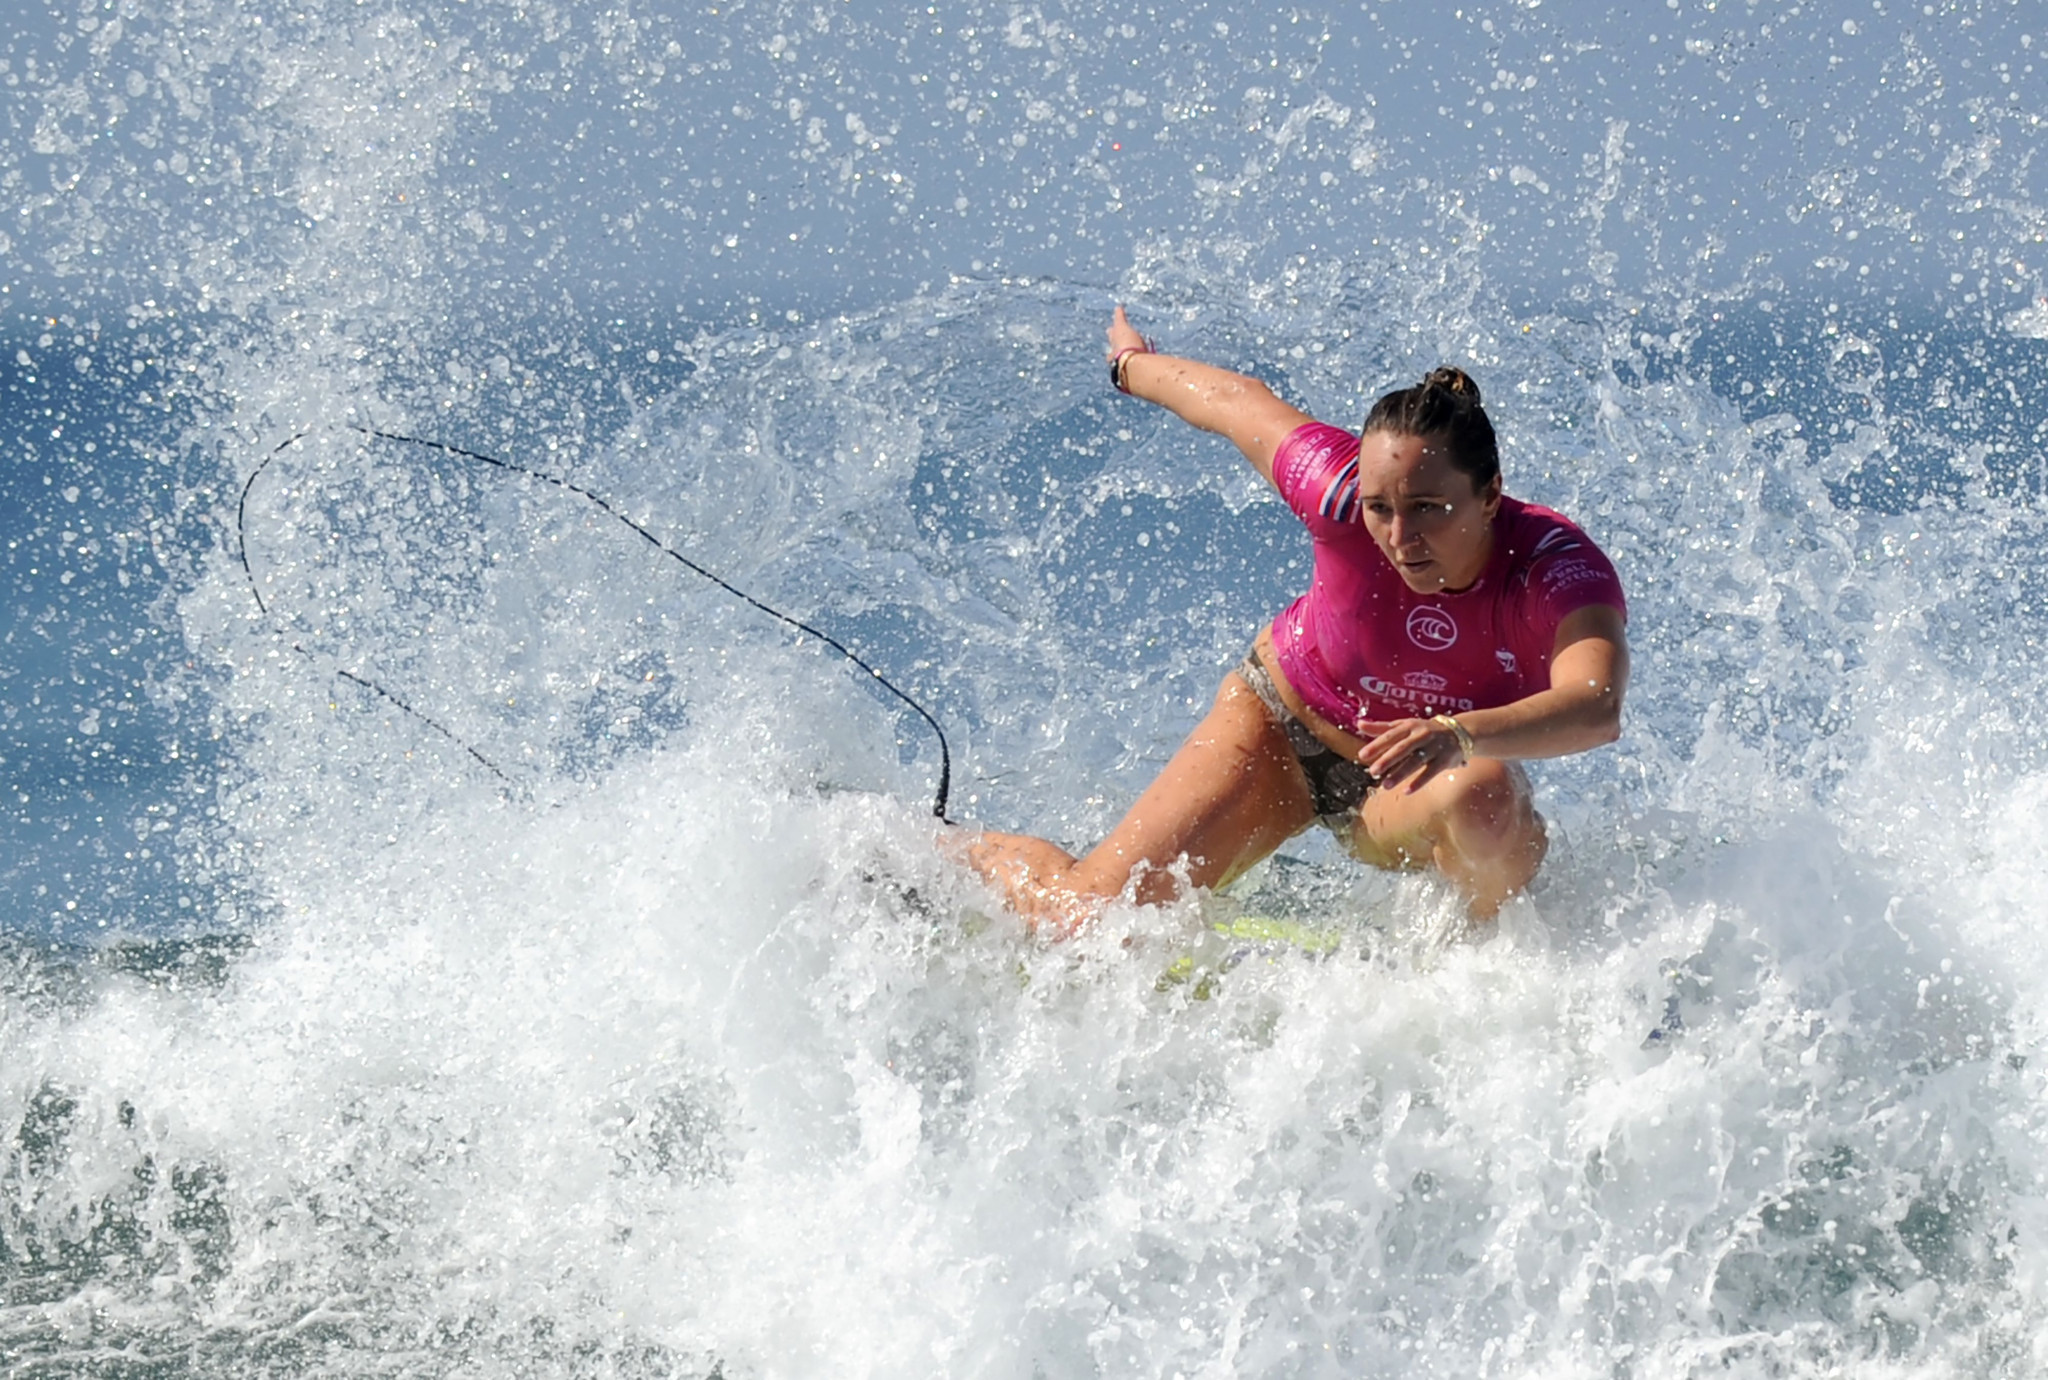 Surfer Carissa Moore is among the six American athletes selected for a Deloitte sponsorship programme ahead of Tokyo 2020 ©Getty Images